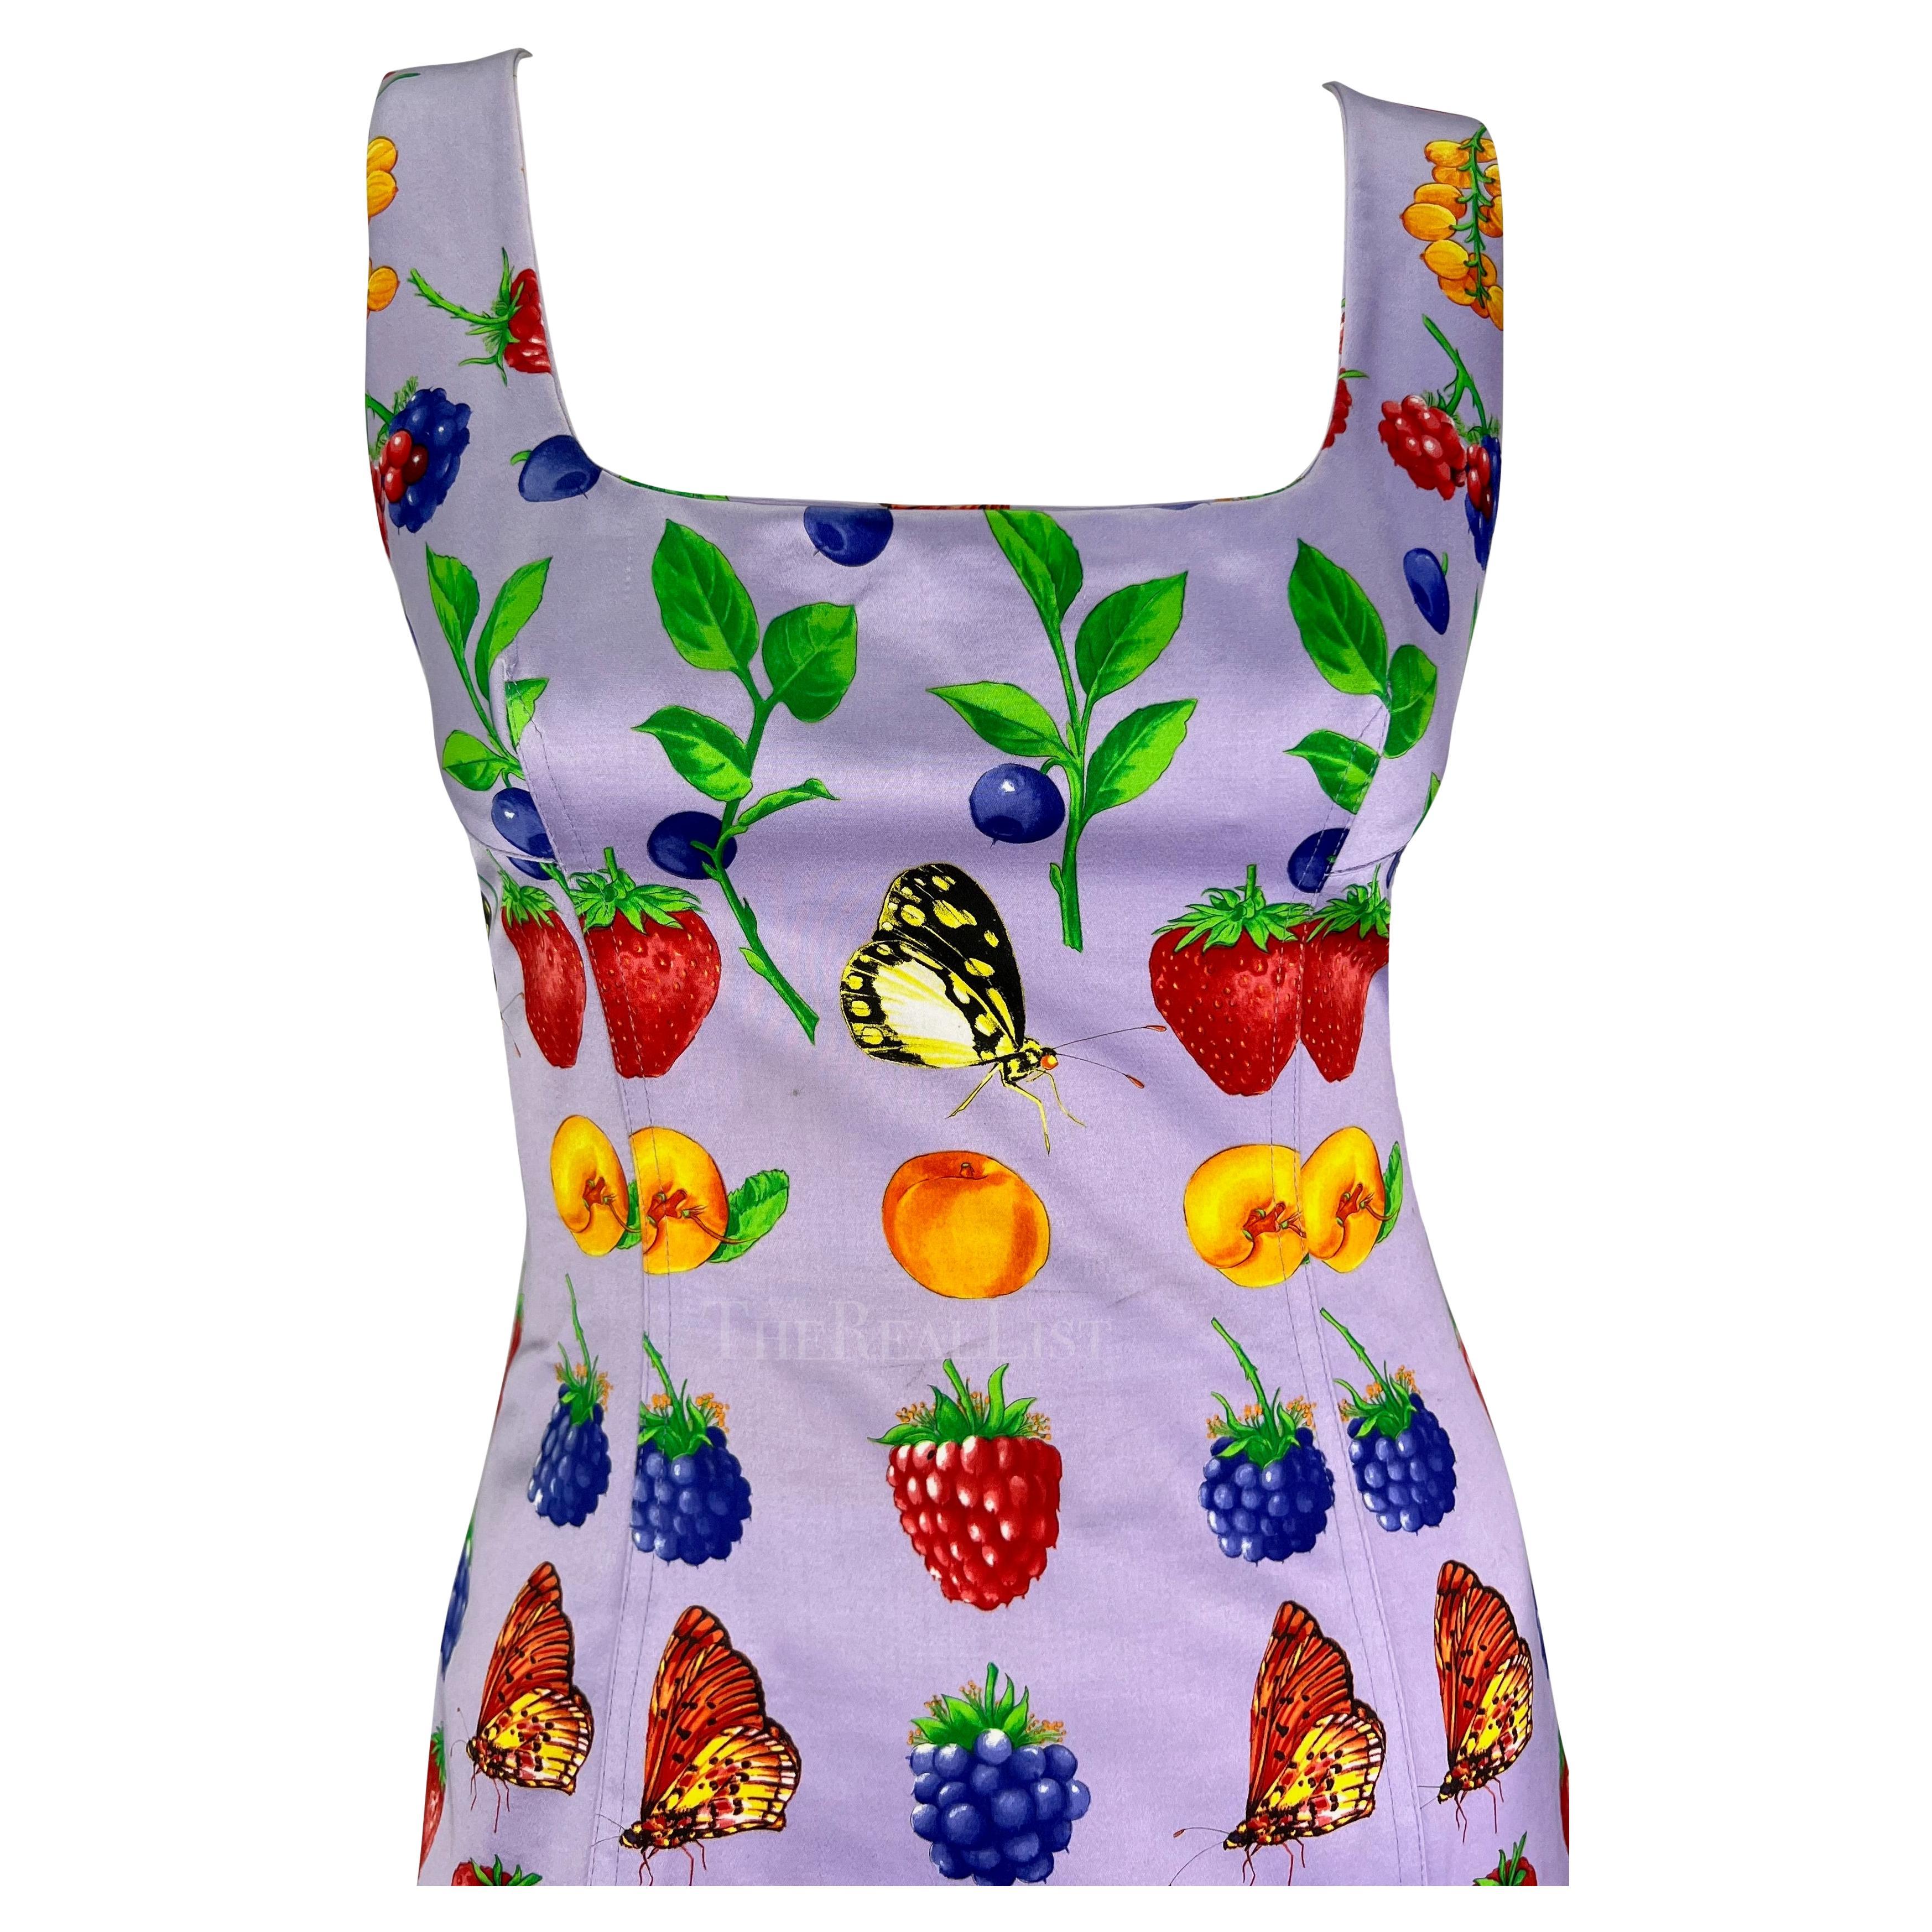 S/S 1995 Gianni Versace Butterfly Berry Garden Print Lavender Pencil Dress For Sale 3